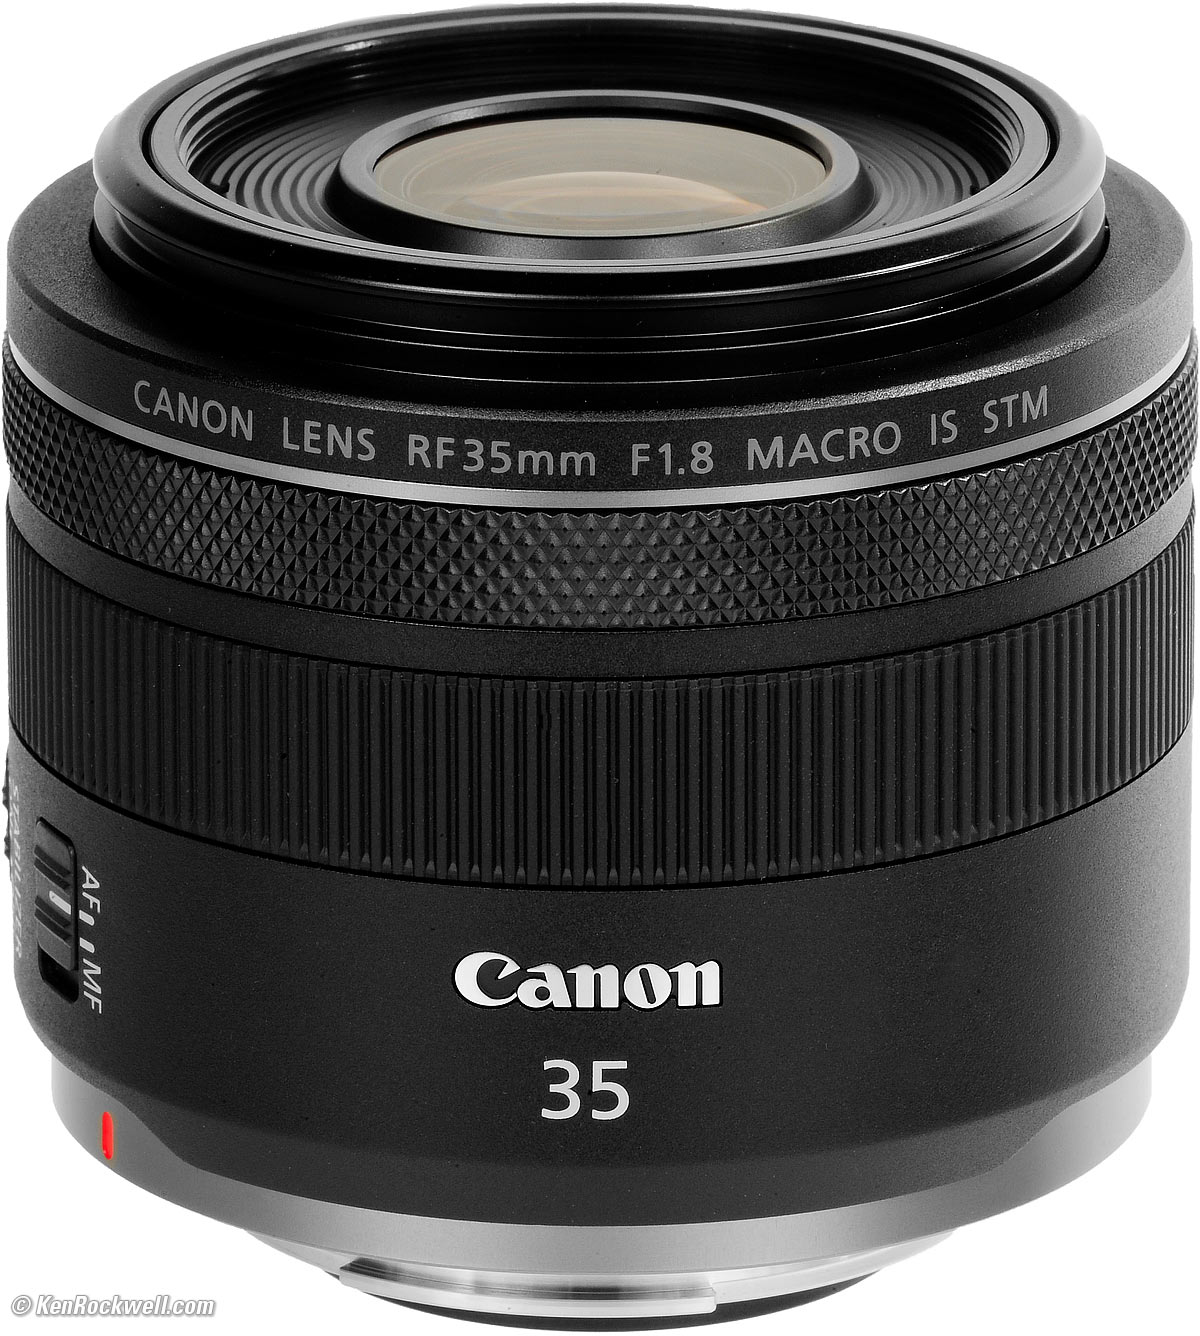 Automatic twenty And team Canon RF 35mm f/1.8 Macro Review